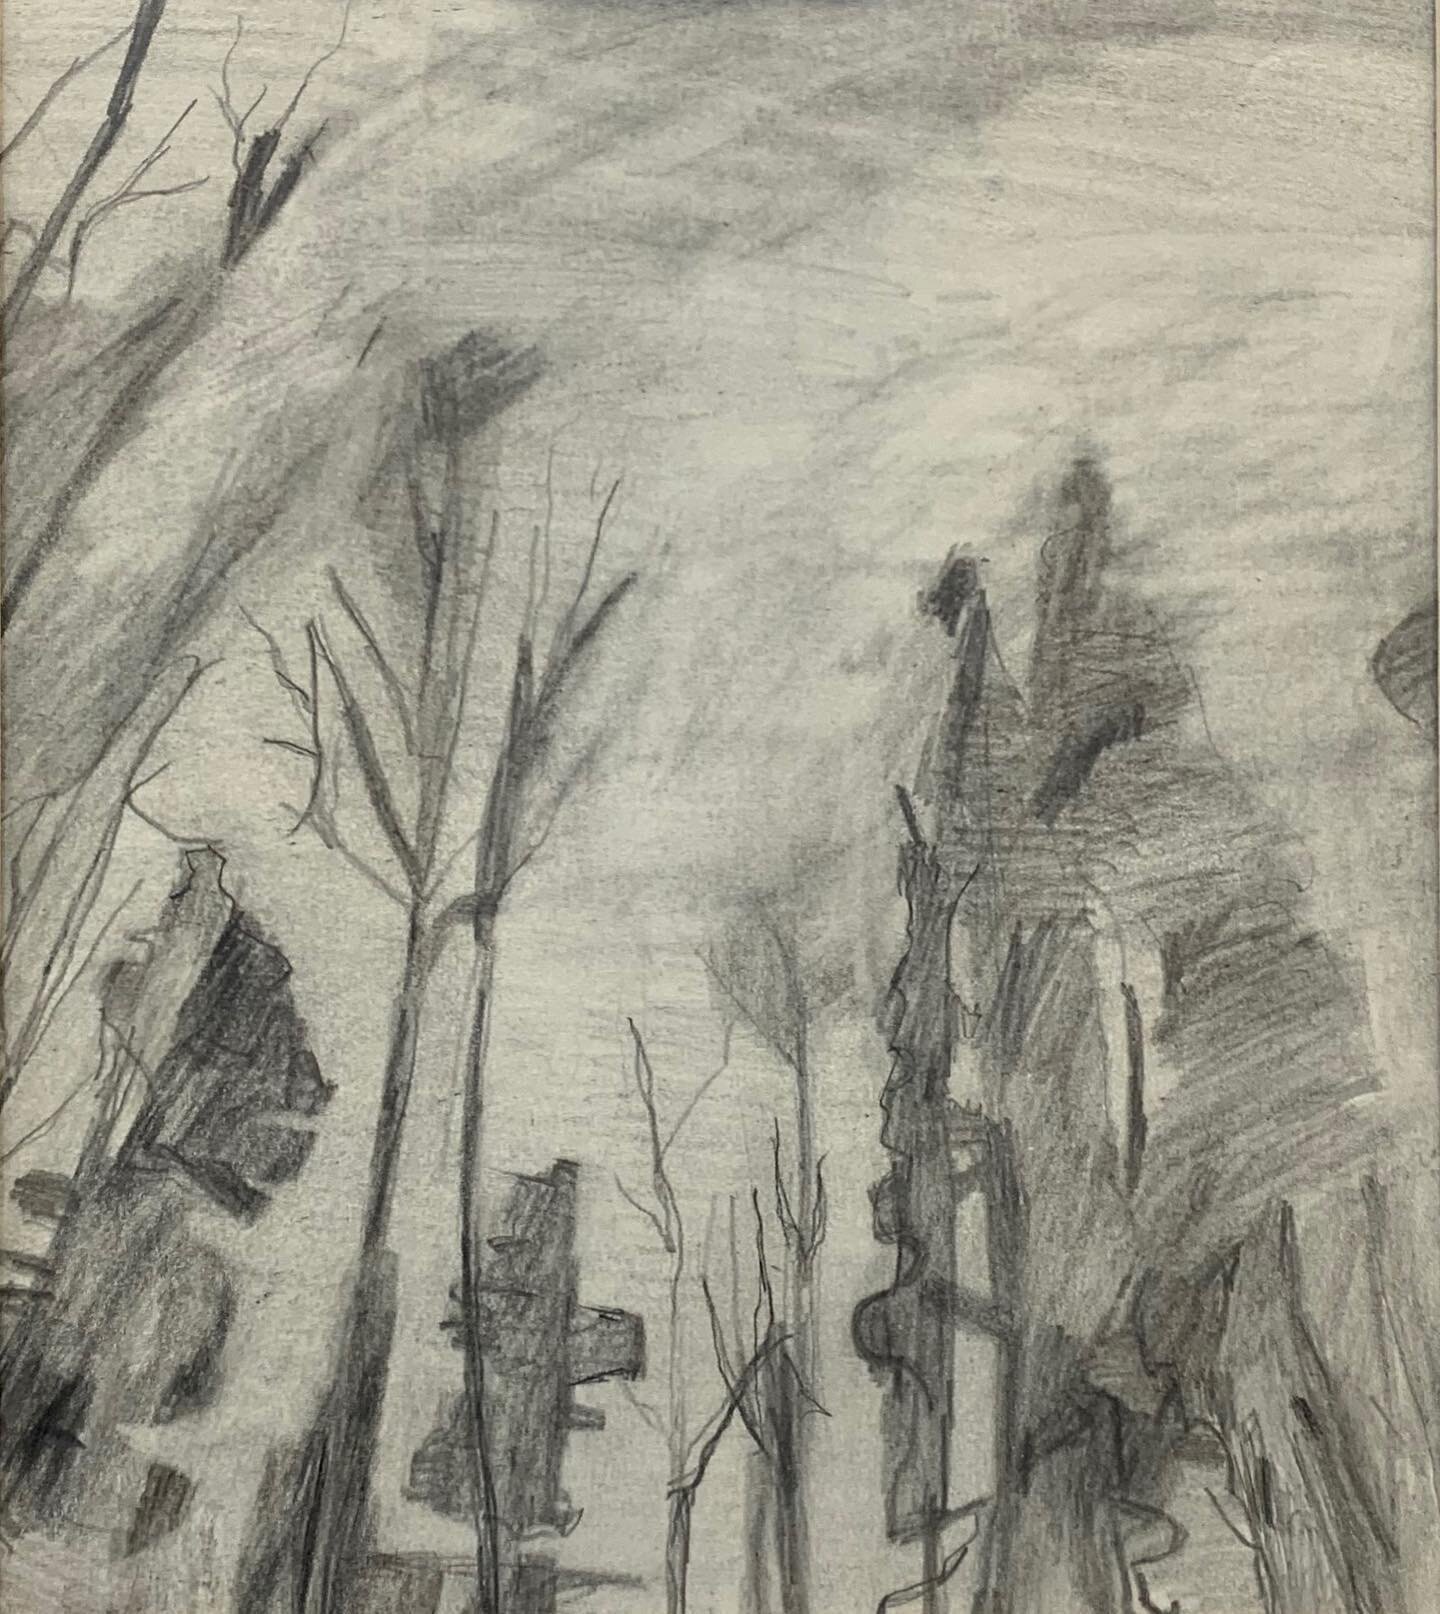 &ldquo;Trees in Nature&rdquo;, graphite drawing
&ldquo;Darks and Lights in Nature I&rdquo;, mixed media
&ldquo;Darks and Lights in Nature II&rdquo;, mixed media
All by Canaan Vaage.
🌿
Canaan Vaage created these three art pieces using pencil and mixe